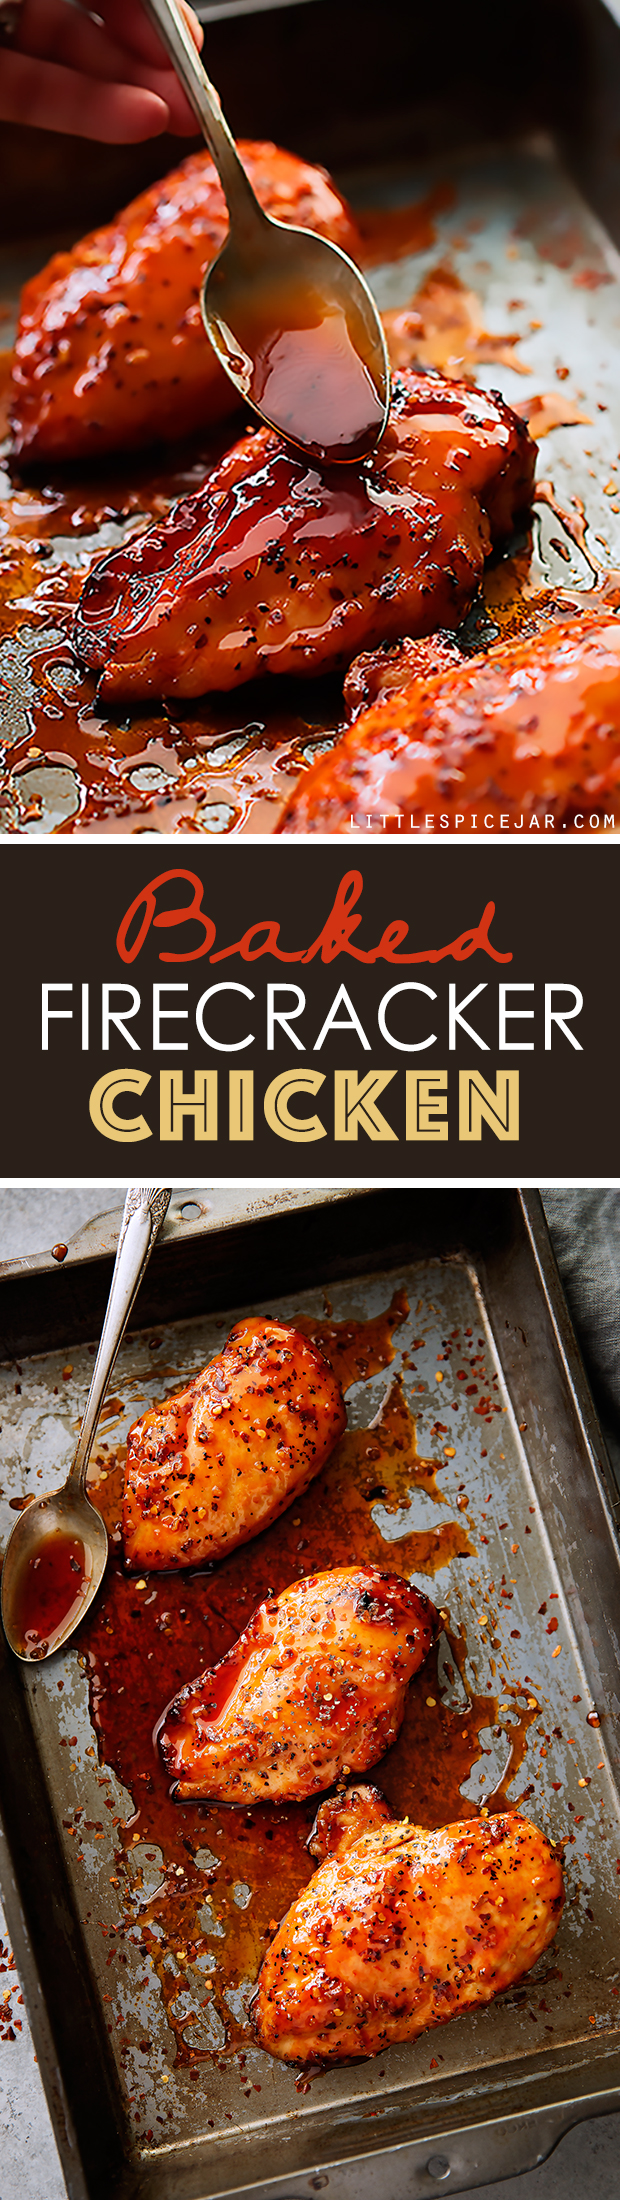 Baked Firecracker Chicken - A quick and easy weeknight dinner recipe! Learn how to make my dynamite firecracker sauce. Serve with rice! #bakedchicken #chicken #dinner #firecrackerchicken #firecrackersauce | Littlespicejar.com